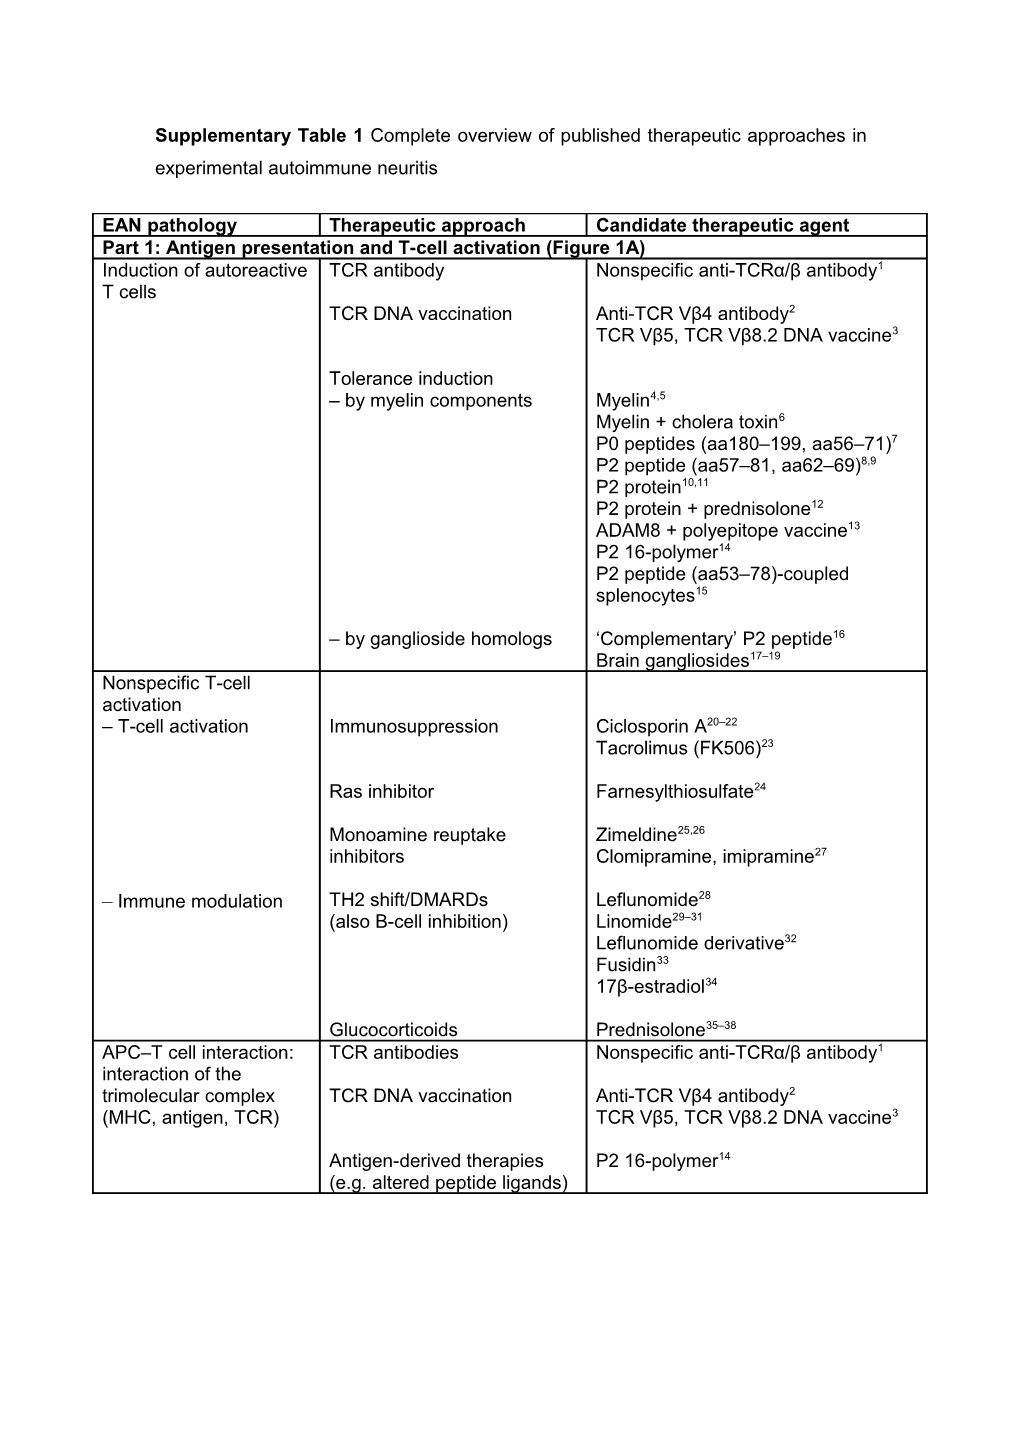 Supplementary Table 1: Complete Overview of Published Therapeutic Approaches in Experimental